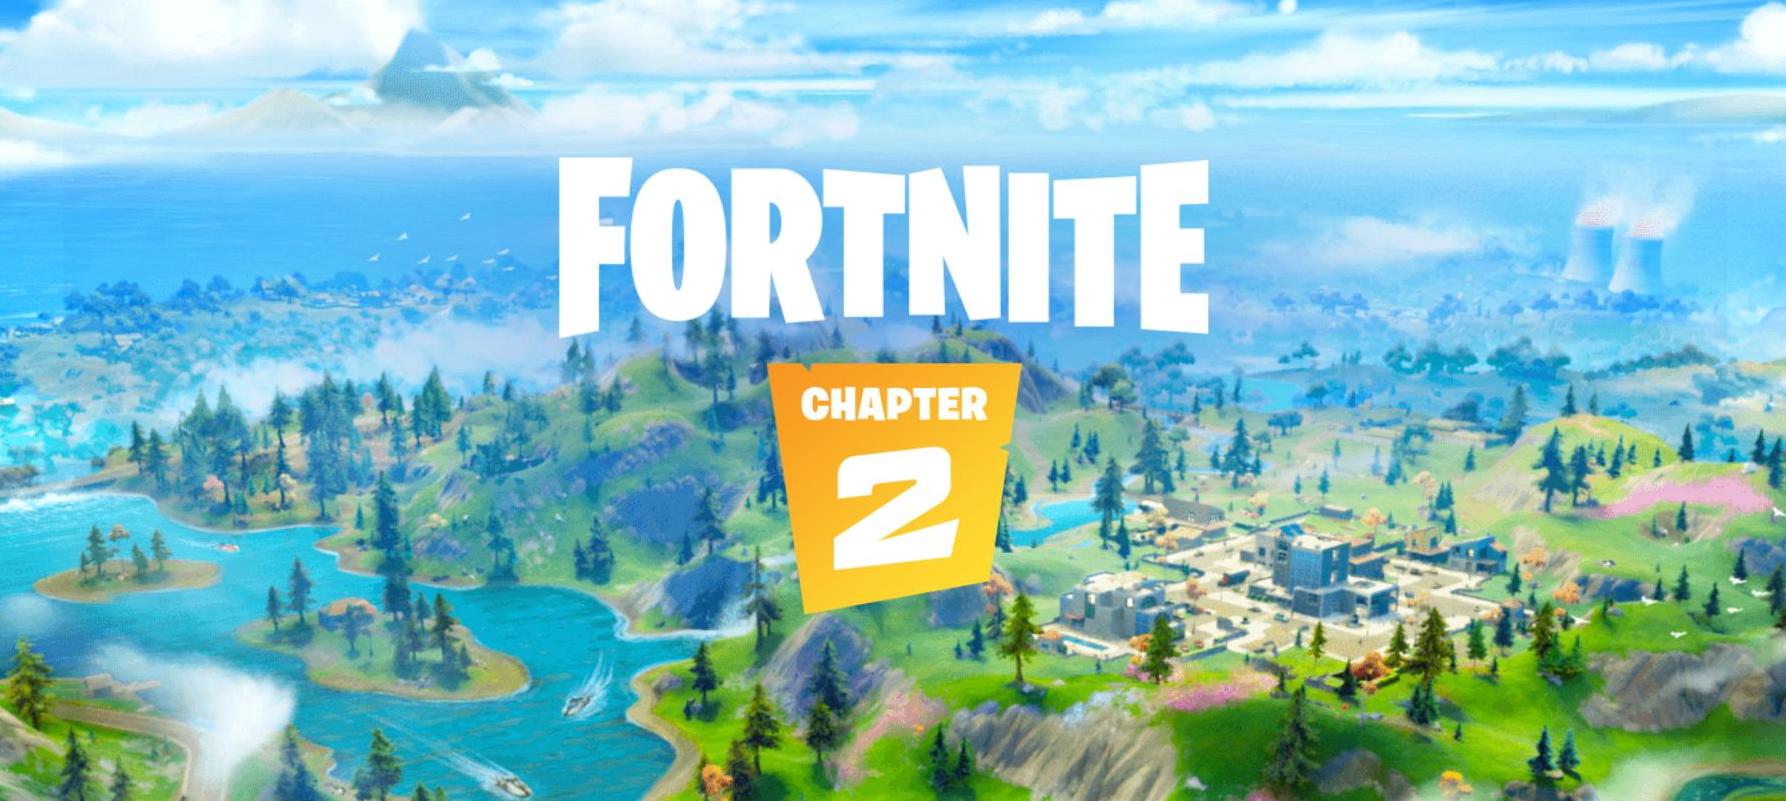 Fortnite Chapter 2 Arrives With An All New Island And Water Gameplay